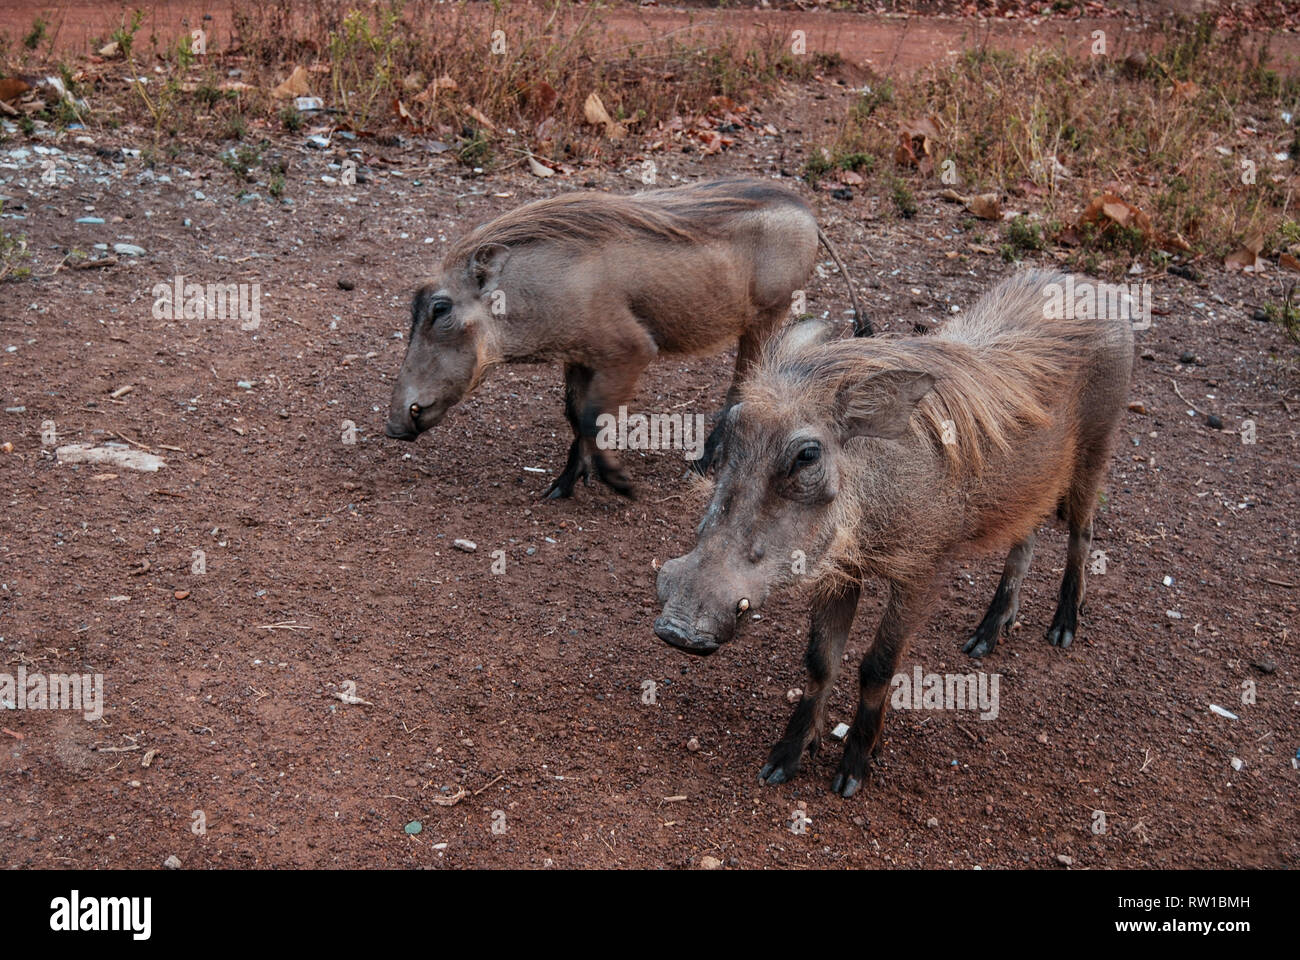 A photo of a pair of beautiful common warthogs (Phacochoerus africanus) in a savanna of Mole National Park, Ghana Stock Photo